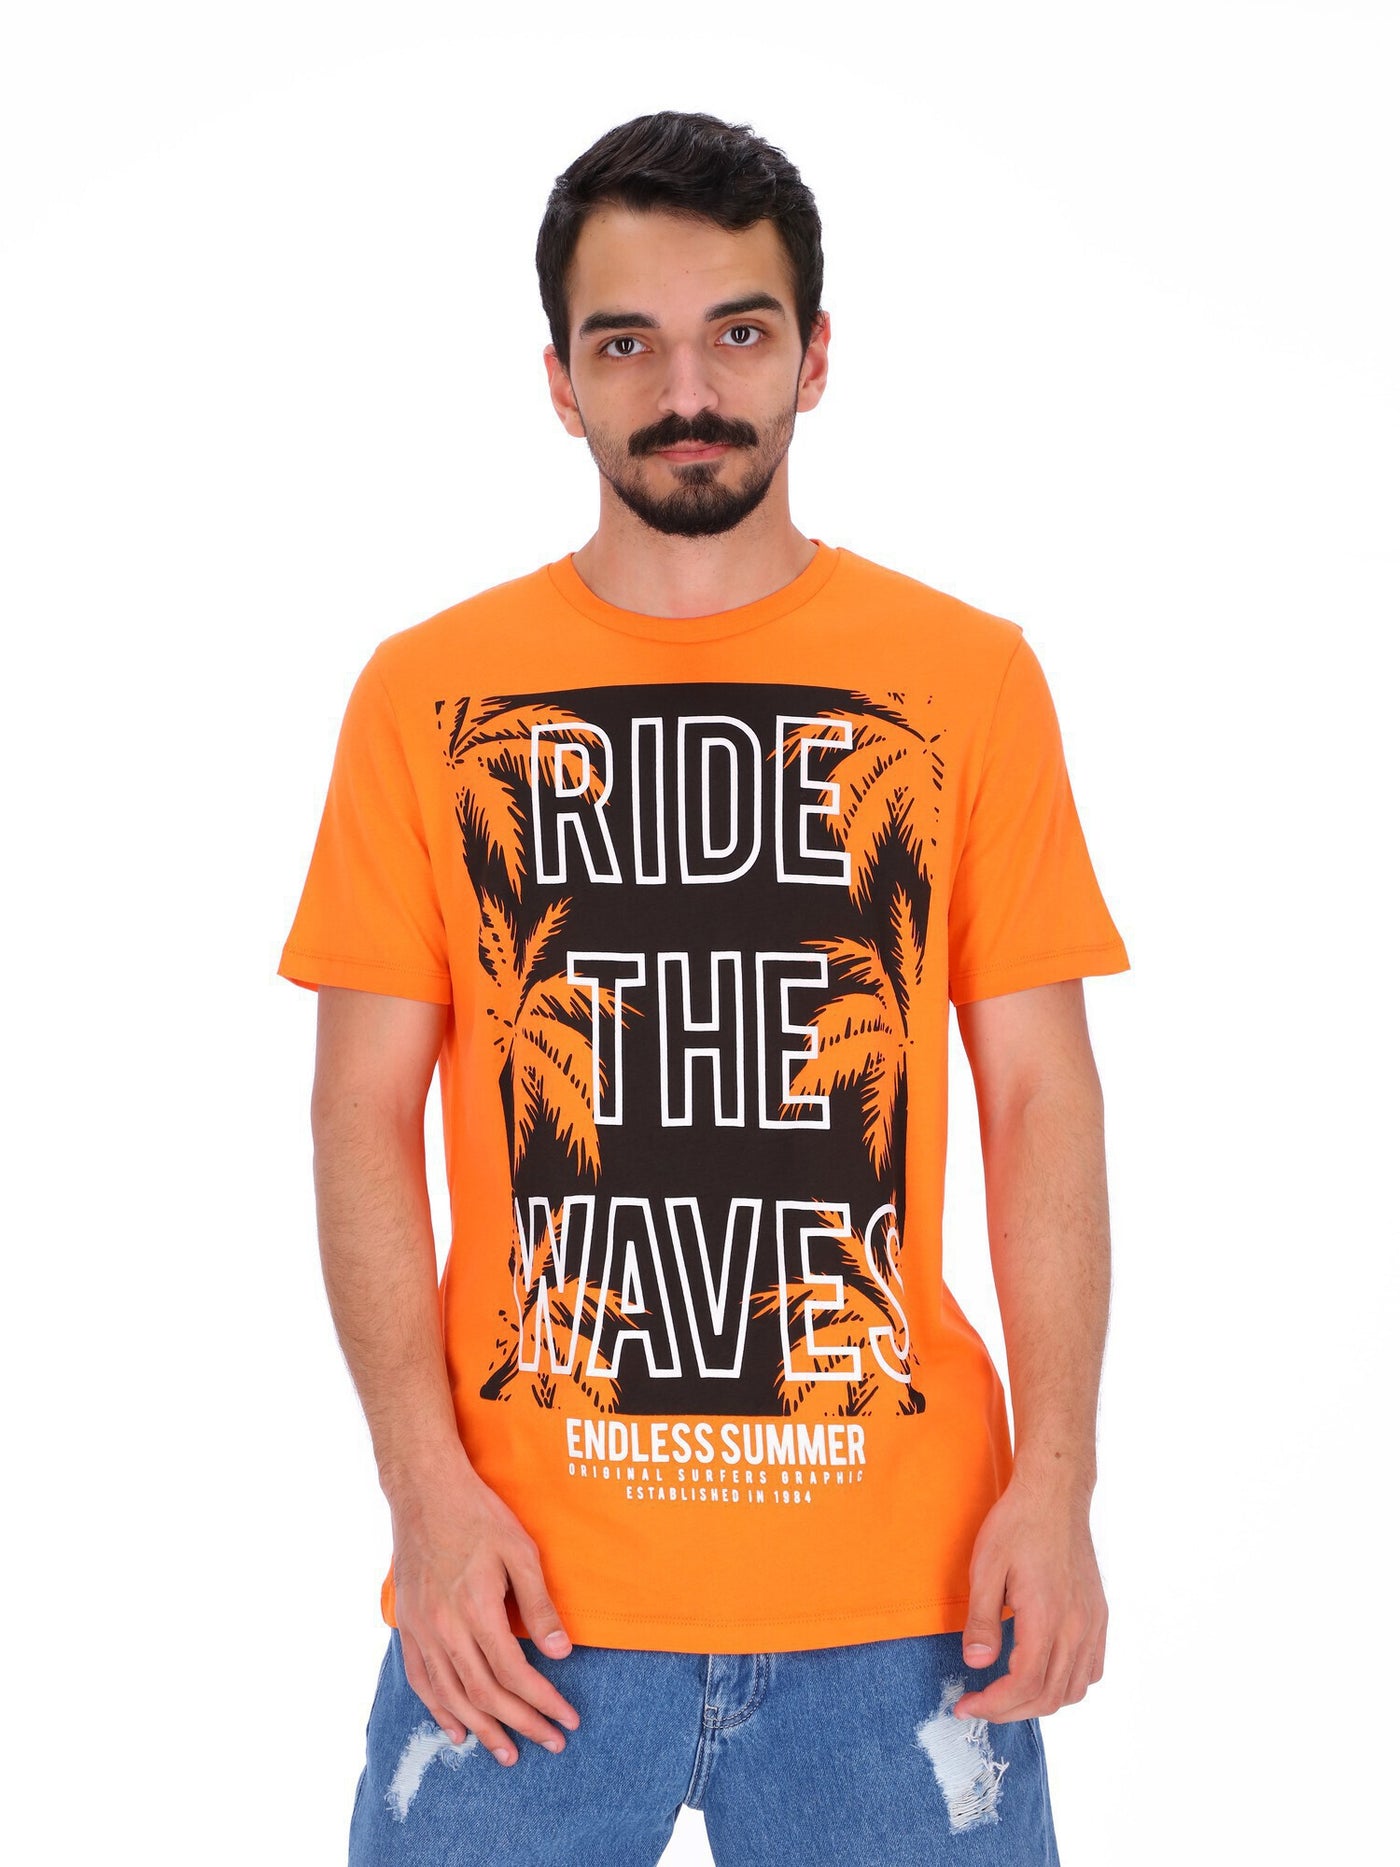 OR Men's Ride The Waves Print T-Shirt